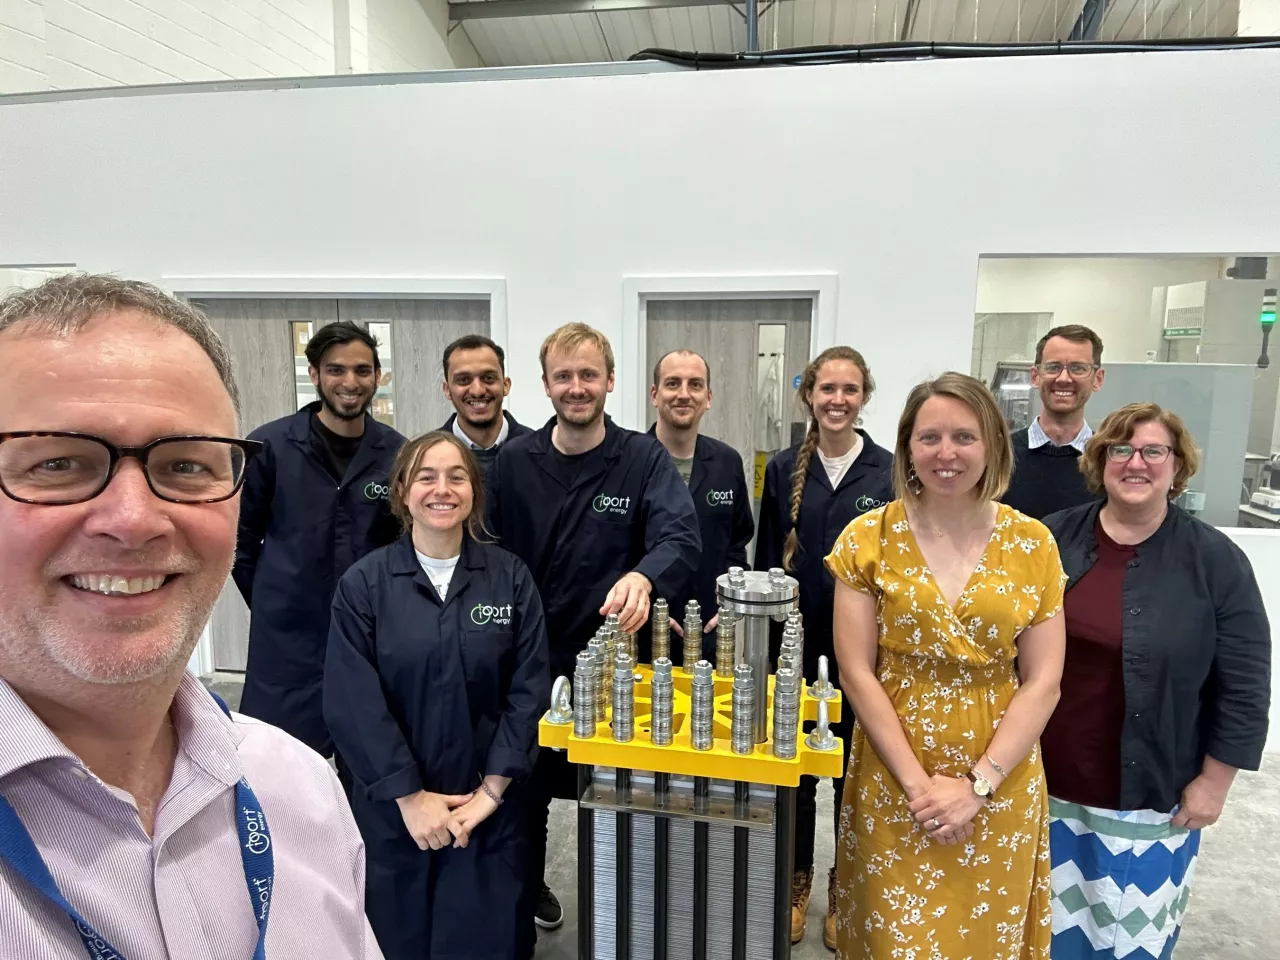 Oort Energy Secures £5M Seed Funding to Decarbonise Industry with Green Hydrogen img#1